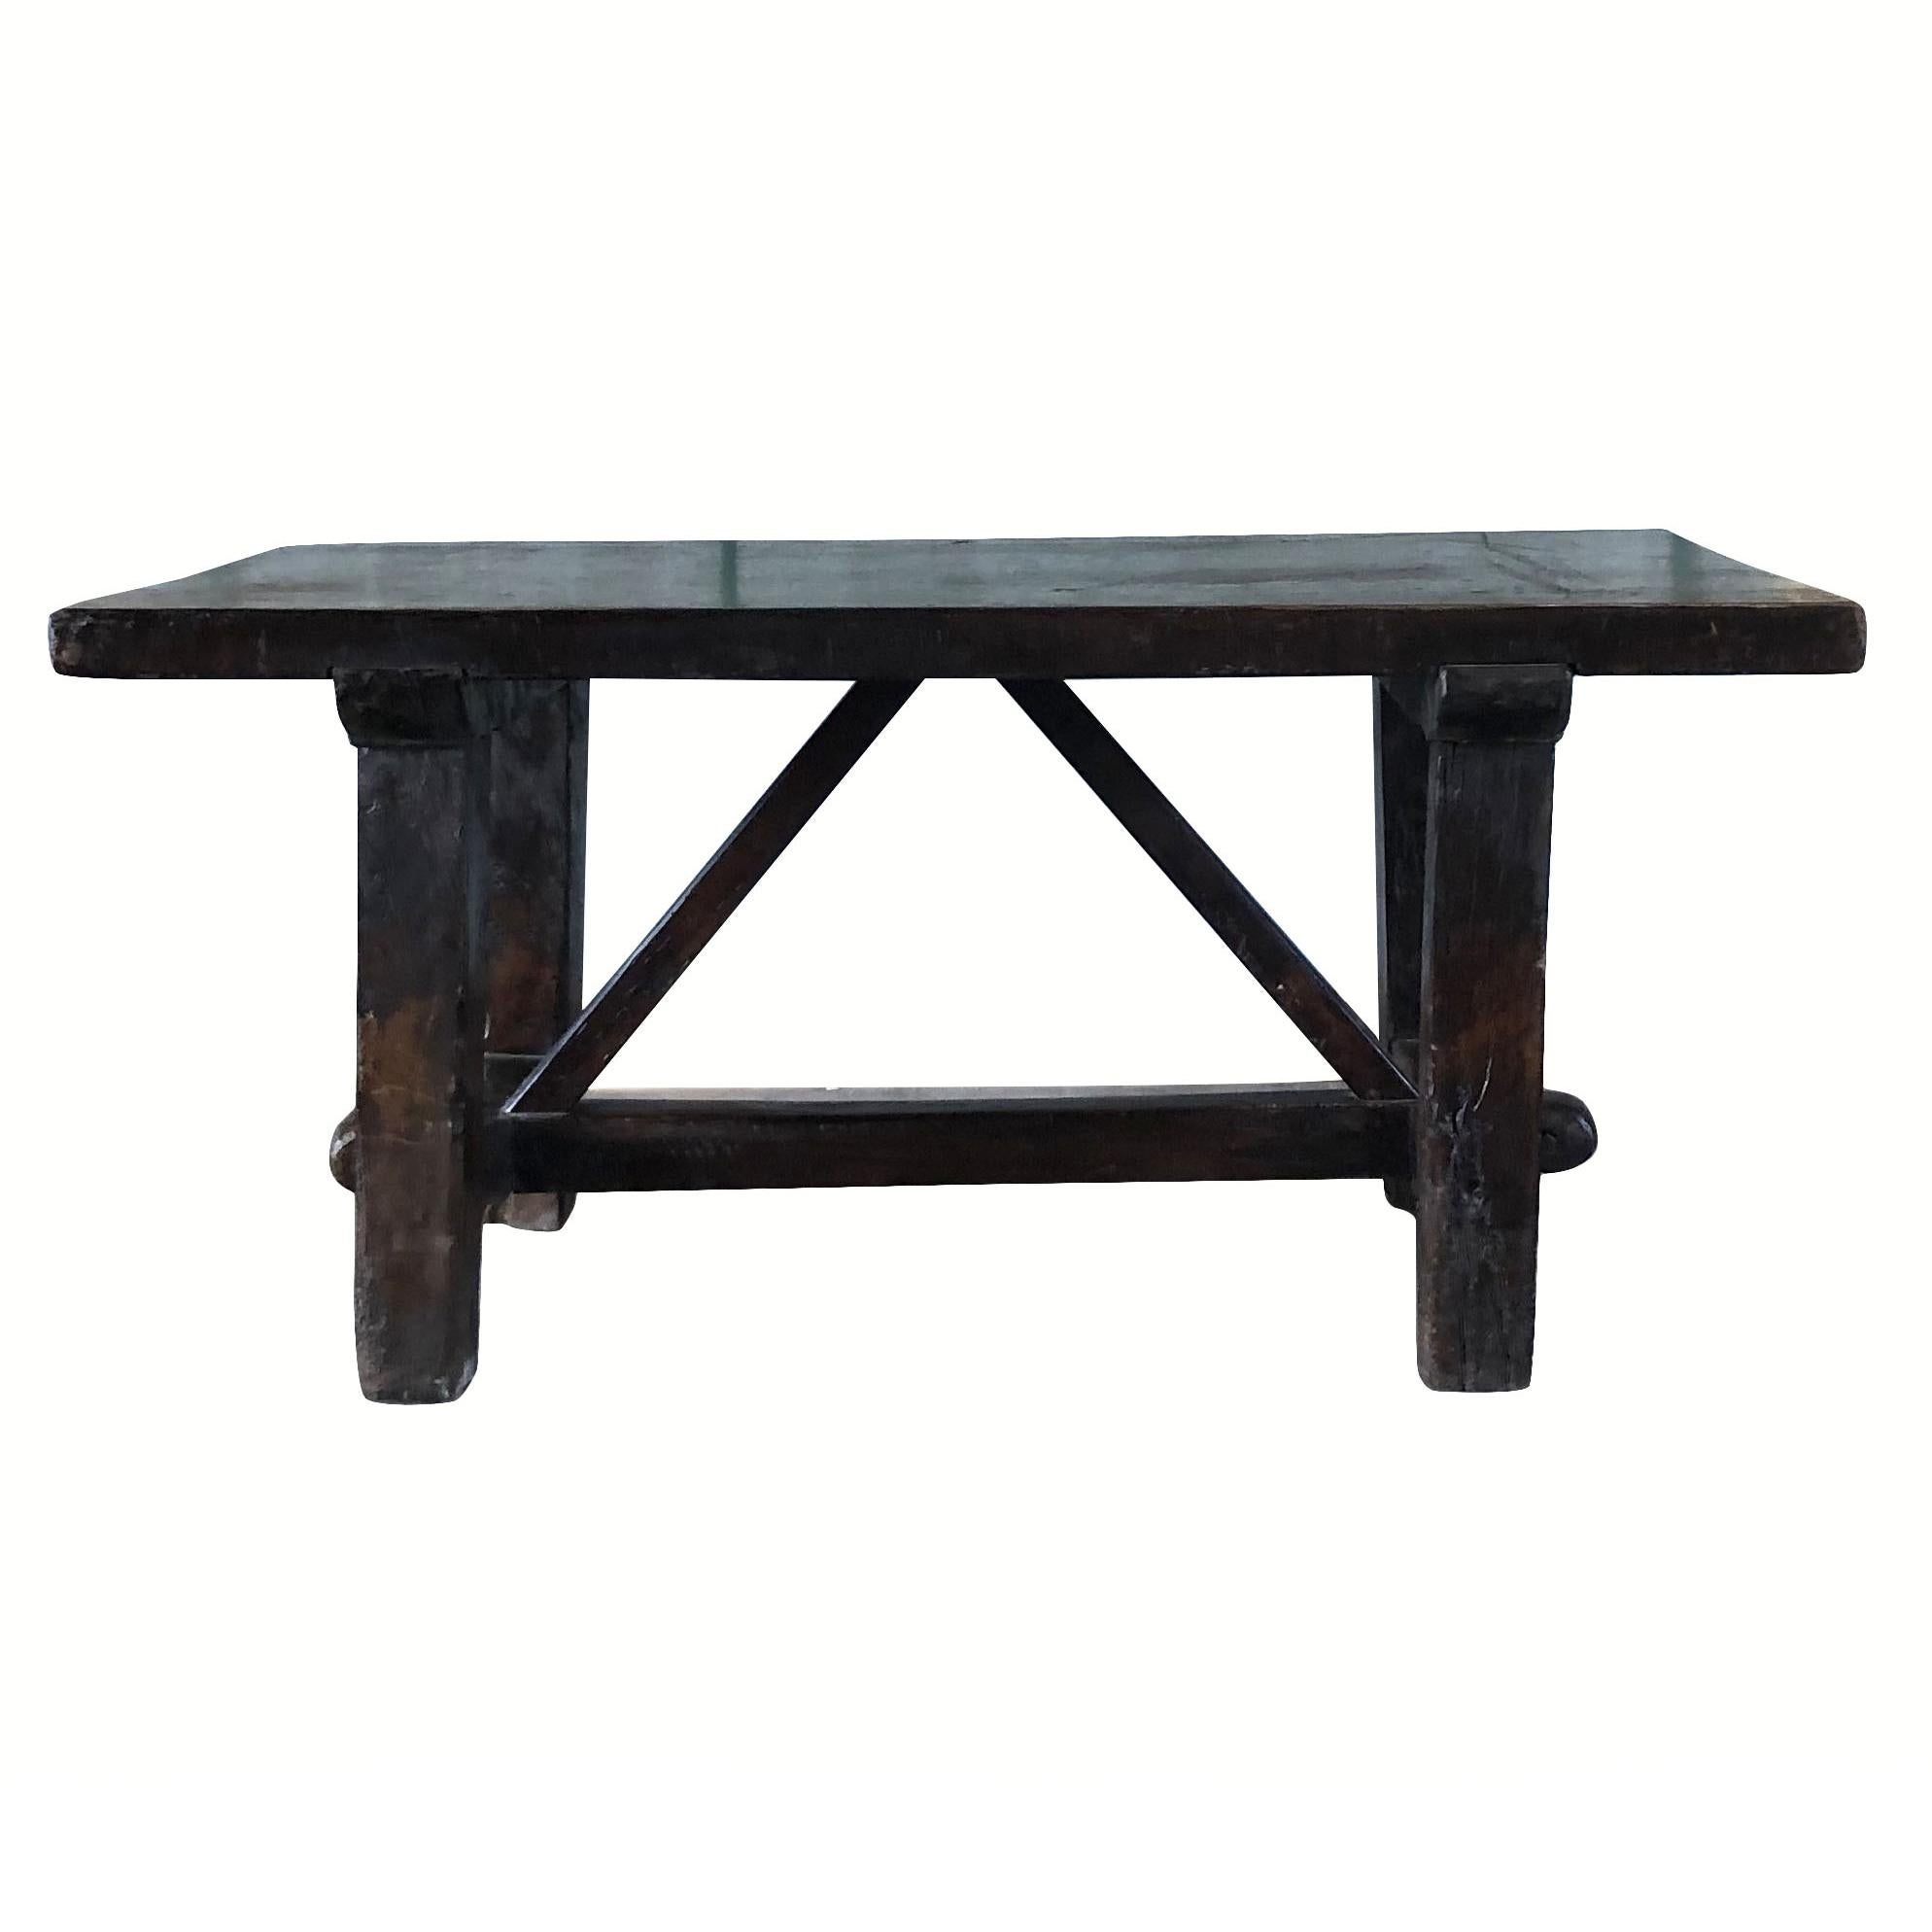 An antique Tuscan kitchen work table made of dark waxed walnut, enhanced by detailed wood cavings. The hand carved farm table is in good condition. Wear consistent with age and use. Circa 1760, Tuscany, Italy.